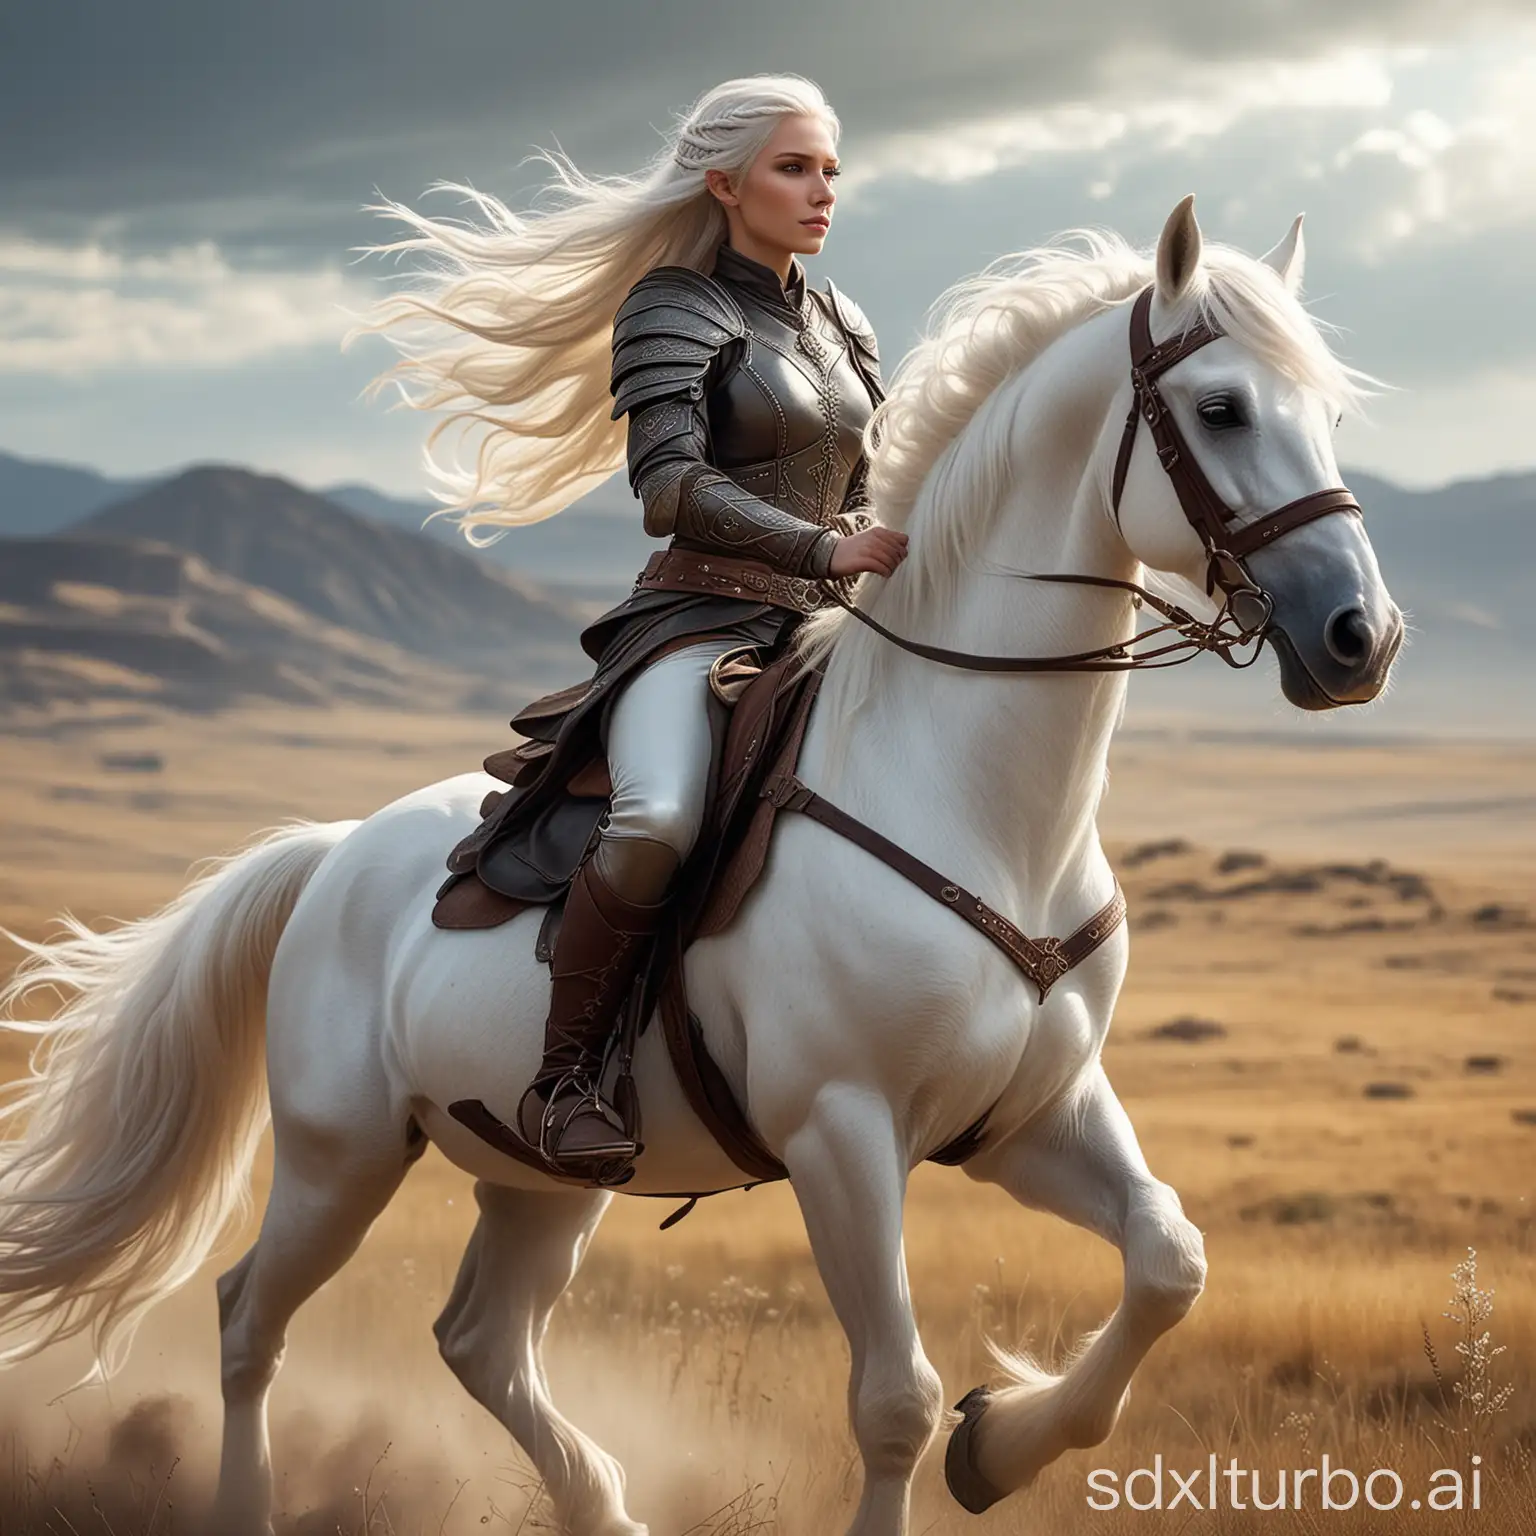 A female elf riding a white horse in the steppe, she has long wild white hair flying in the wind, she wears leather armor, she has a regal self confident vigilant aura